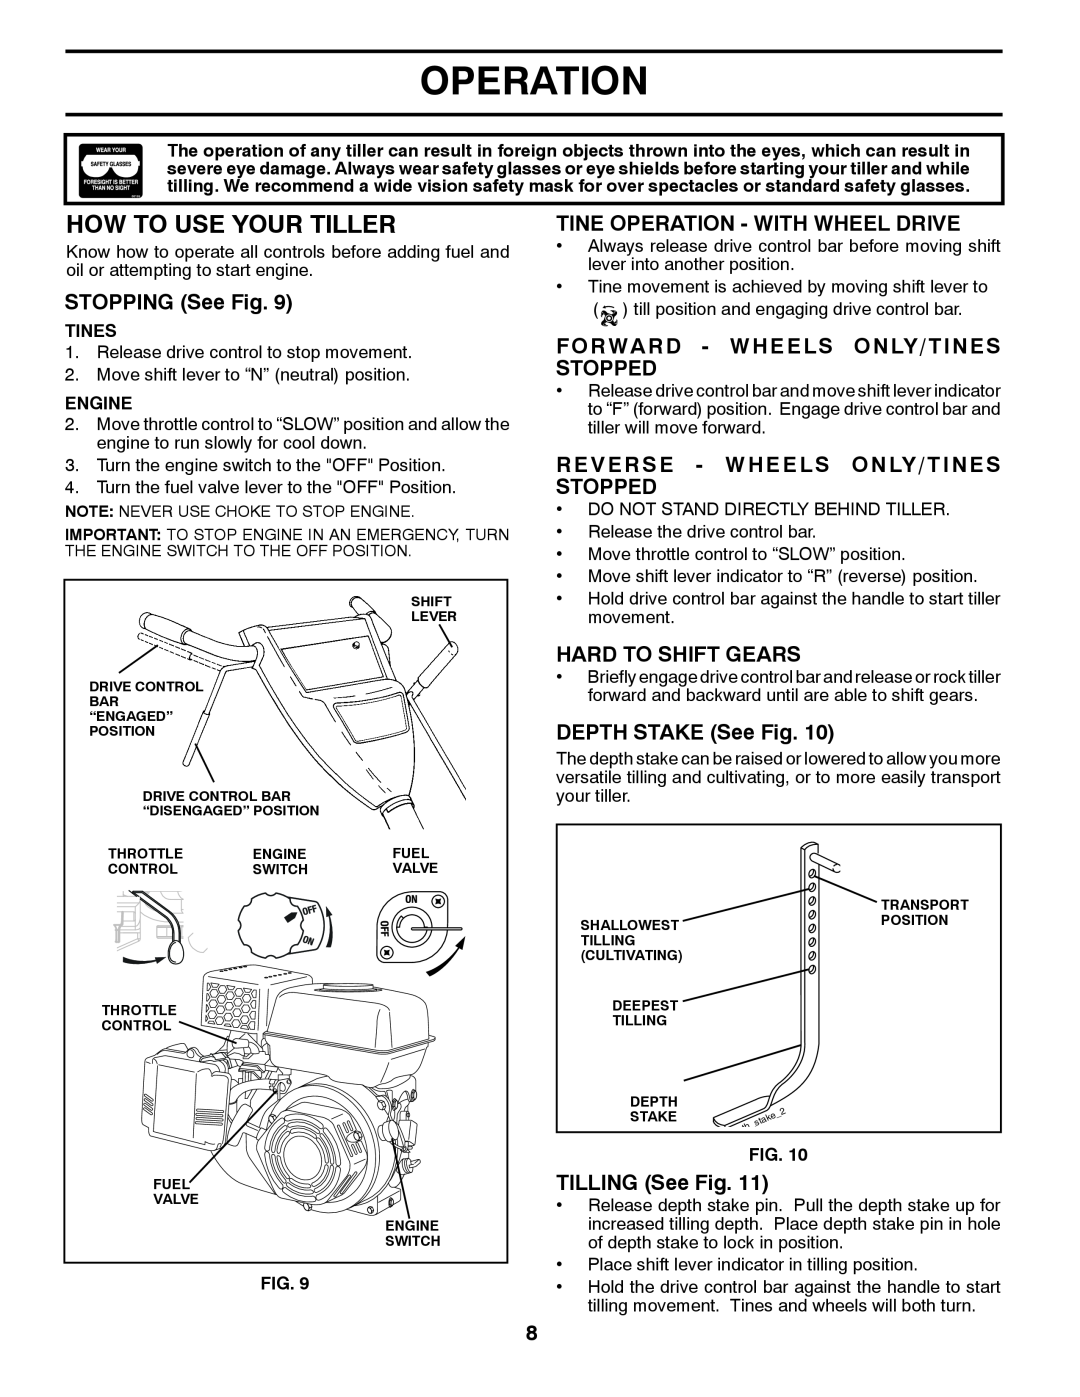 Poulan 423813 How To Use Your Tiller, STOPPING See Fig, Tine Operation - With Wheel Drive, Hard To Shift Gears, Tines 